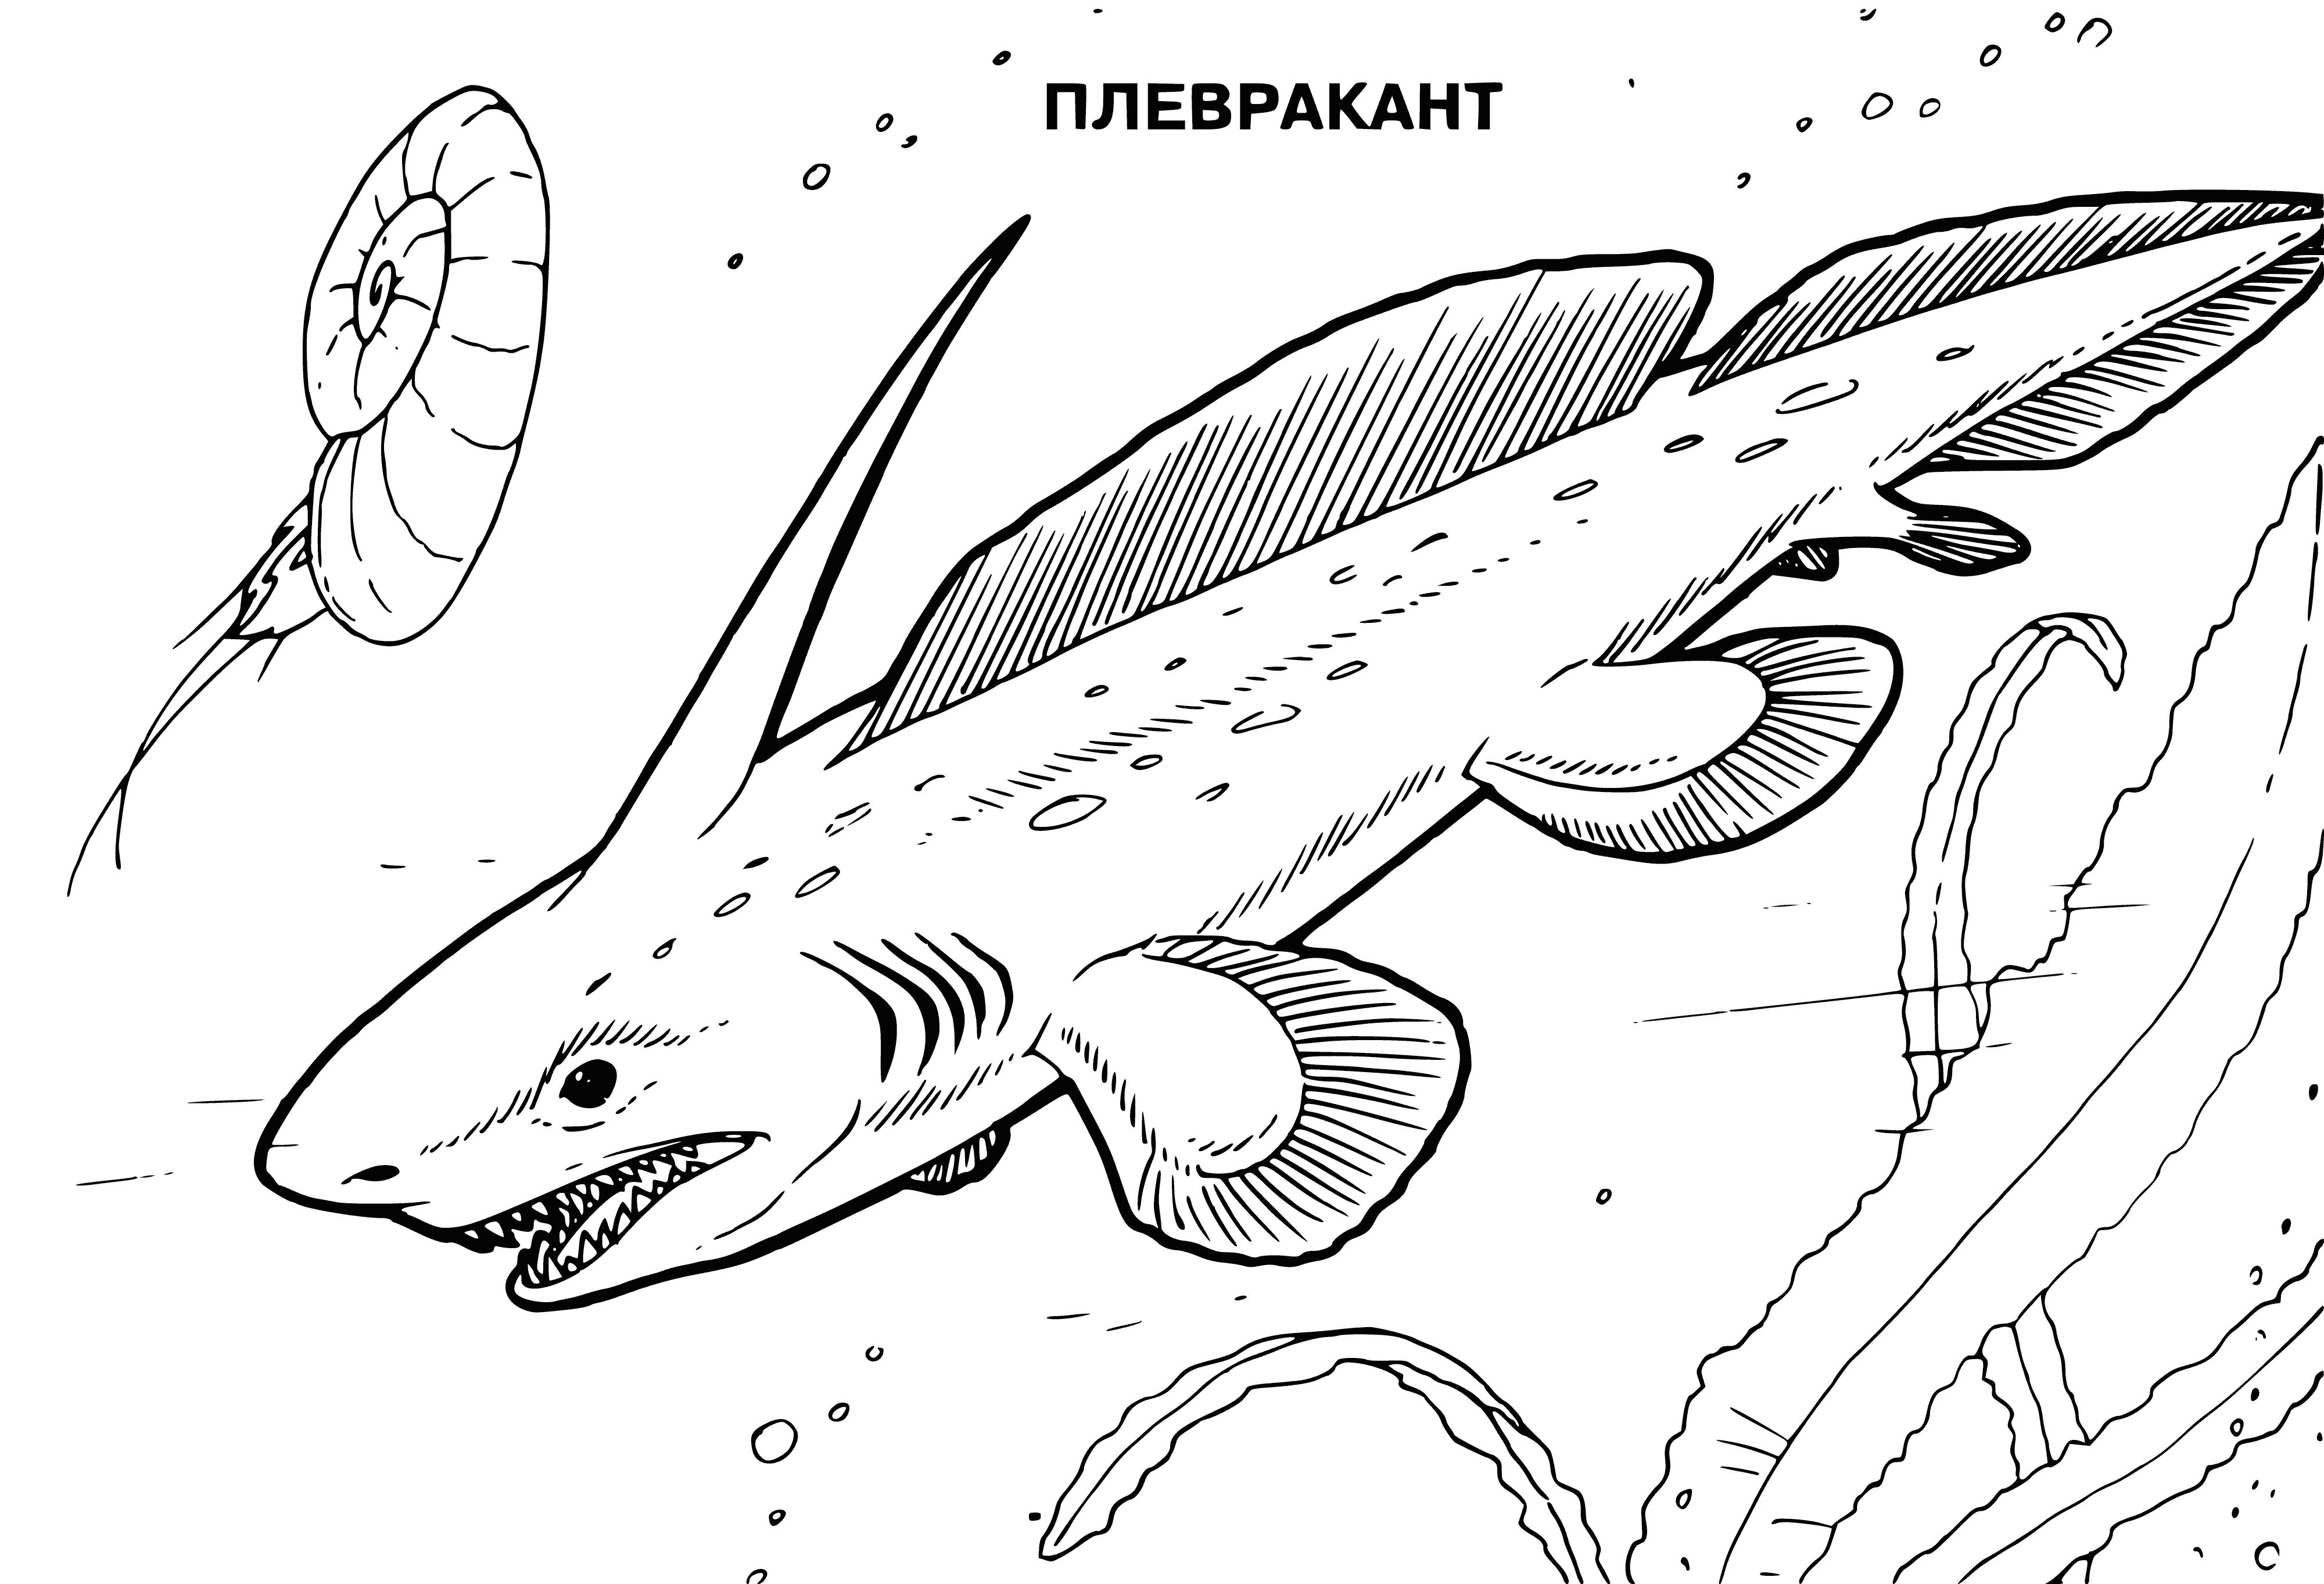 coloring page: Plevracants were herbivorous dinosaurs with long necks & small heads. They lived in herds during the late Cretaceous period.